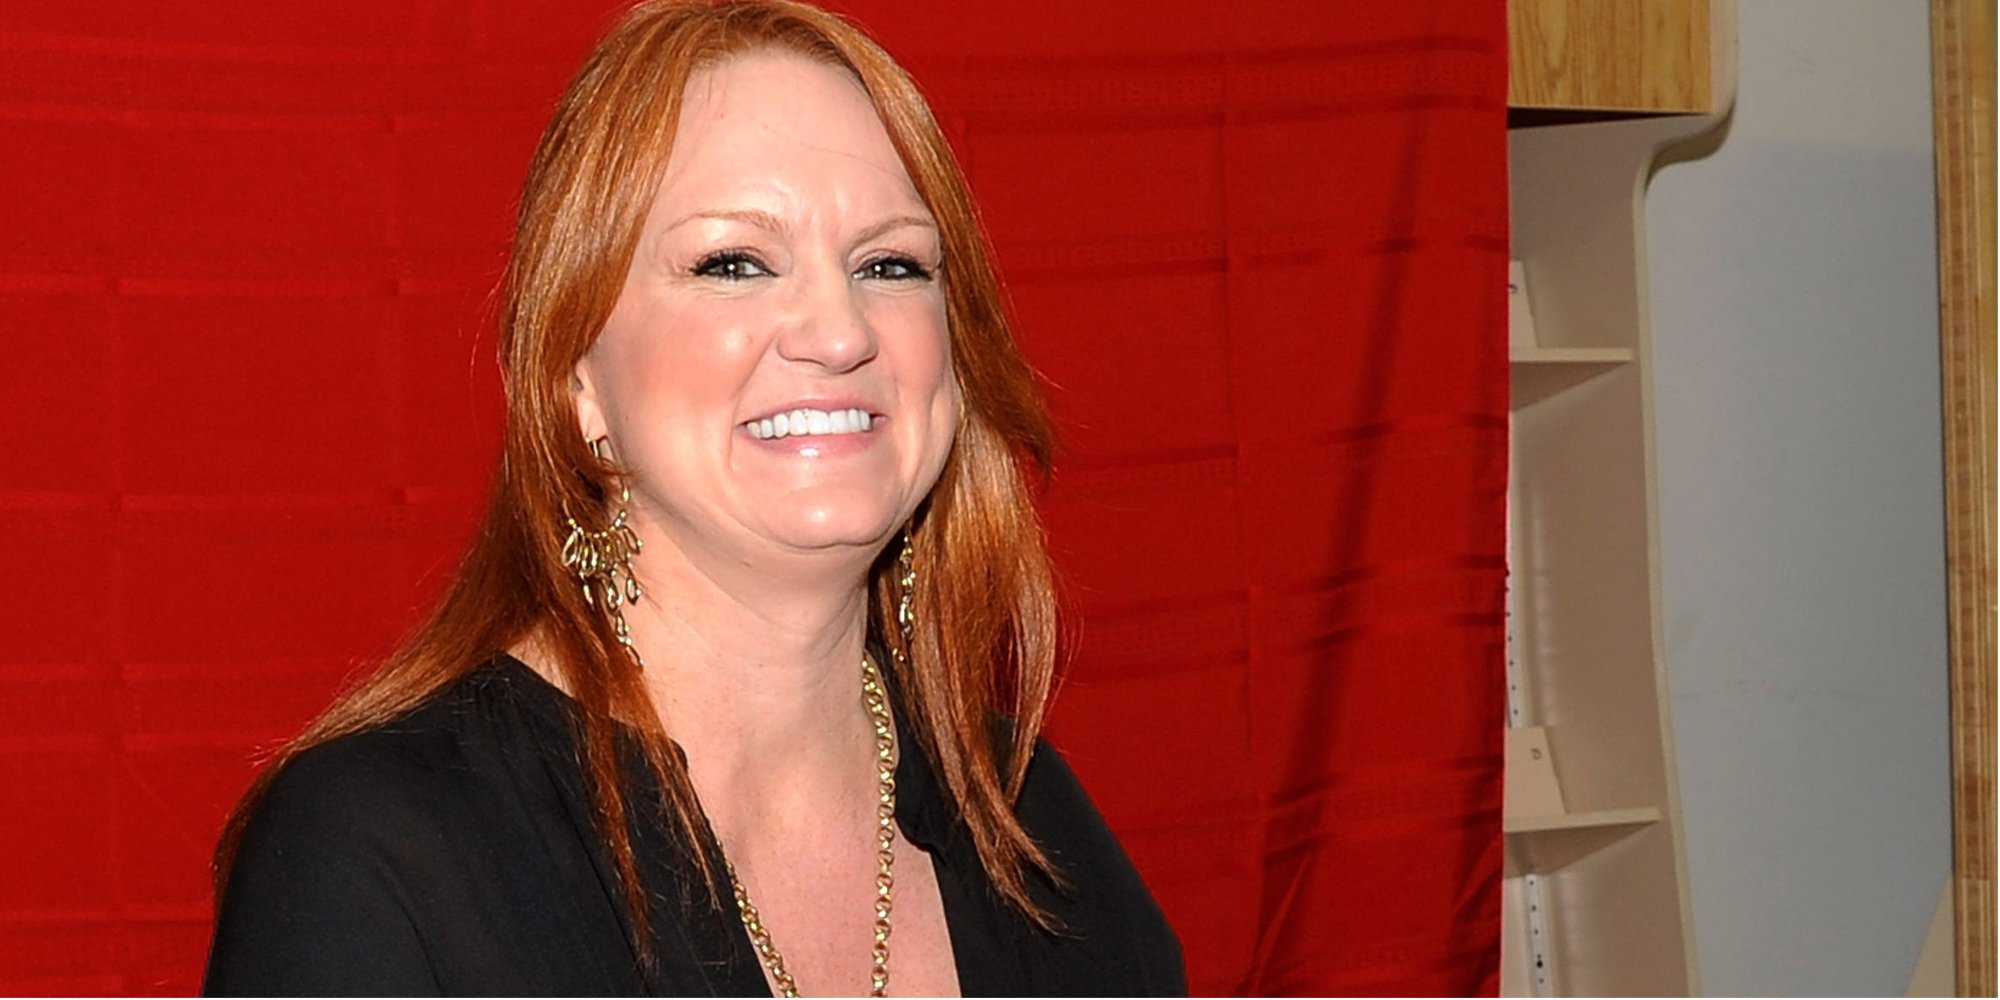 'The Pioneer Woman' star Ree Drummond poses in front of a red background wearing a black shirt and cooks for her kids.